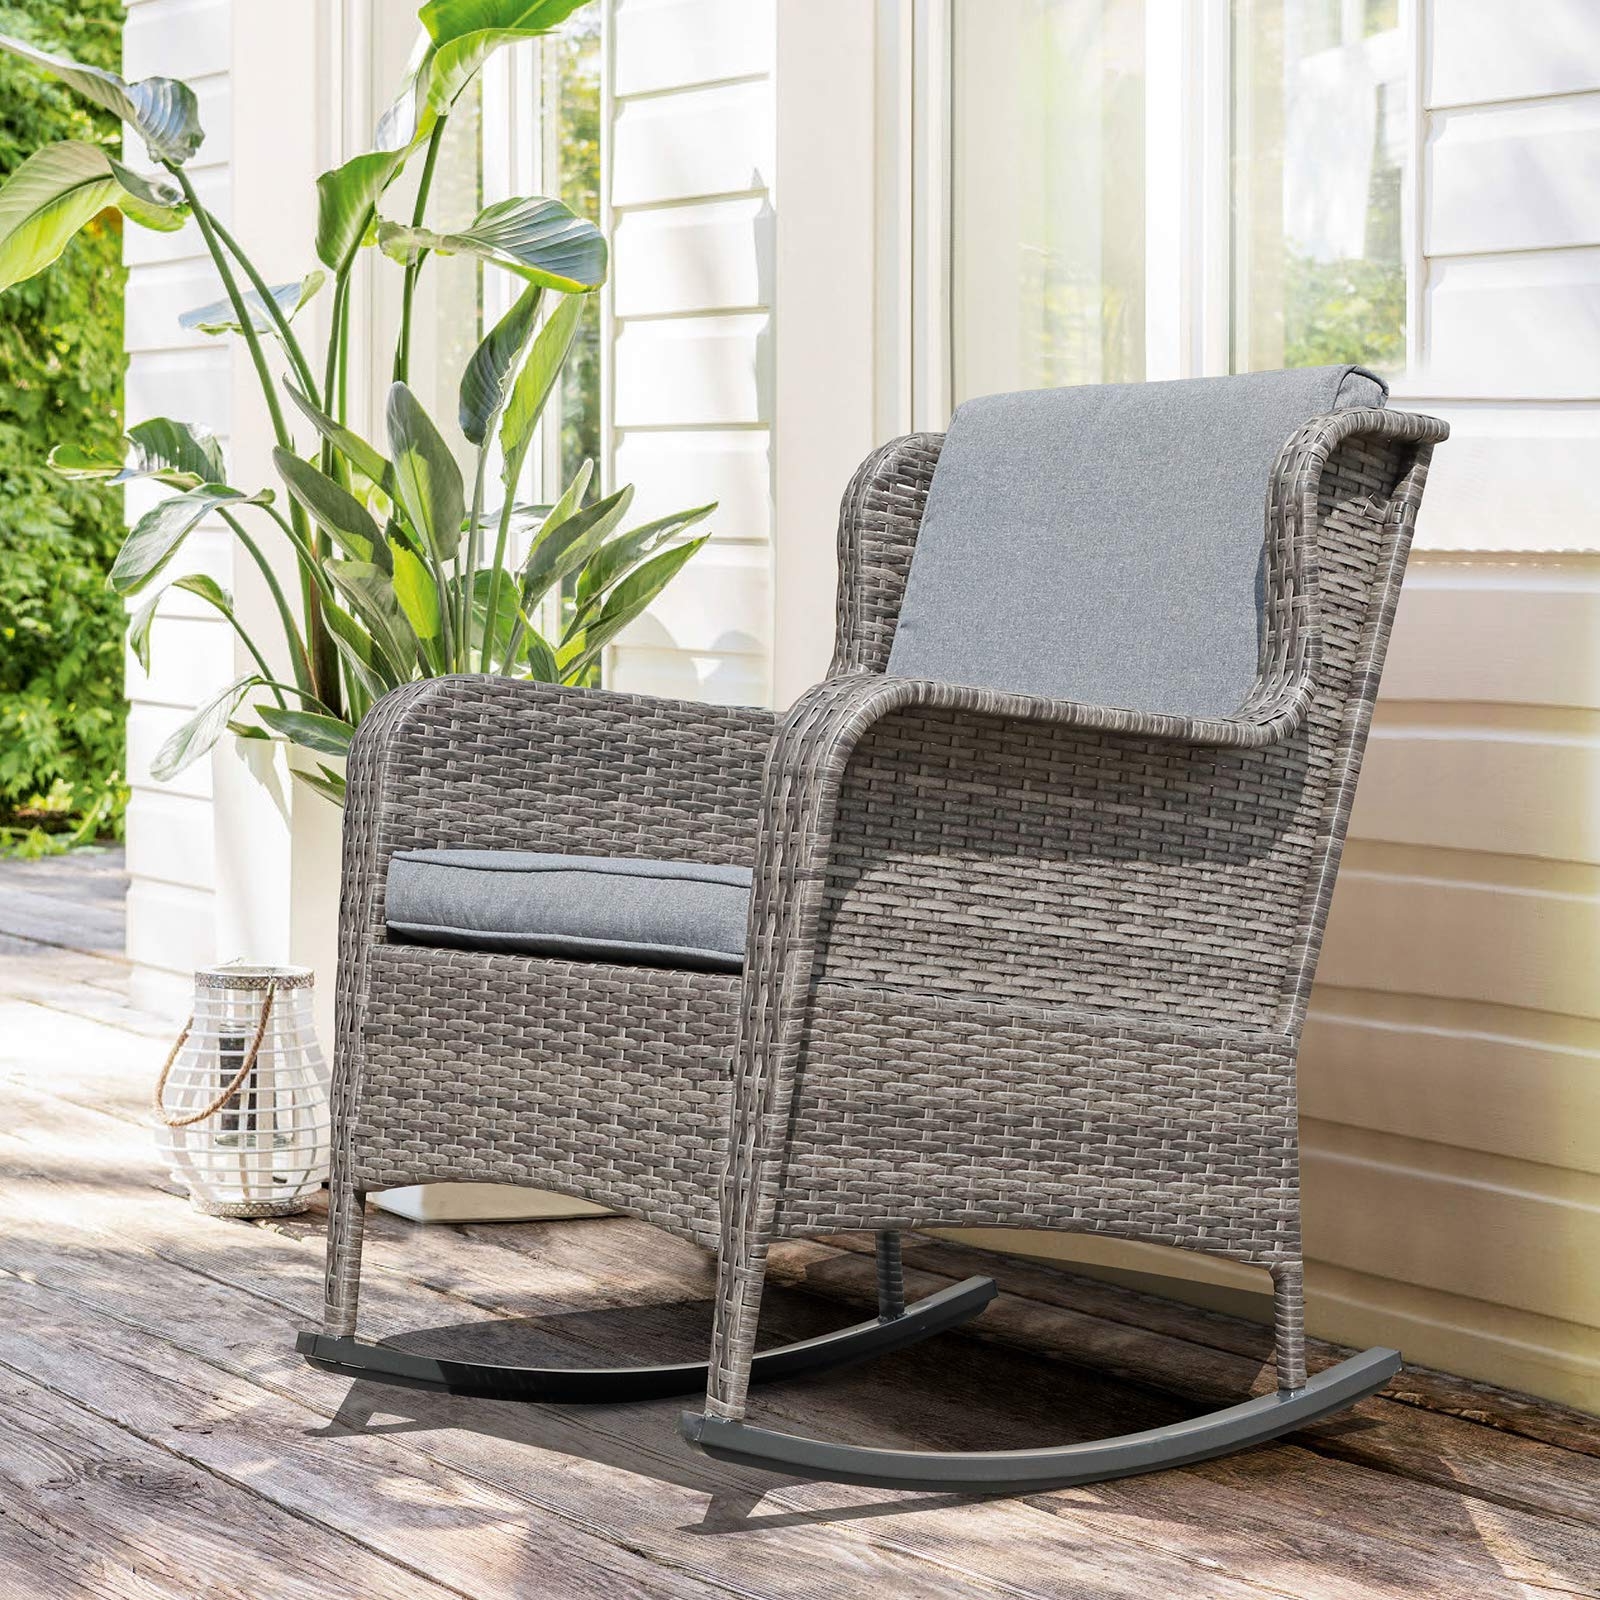 Outdoor Patio Rattan Rocking Chair with Cushion, 3 colors - COBANA